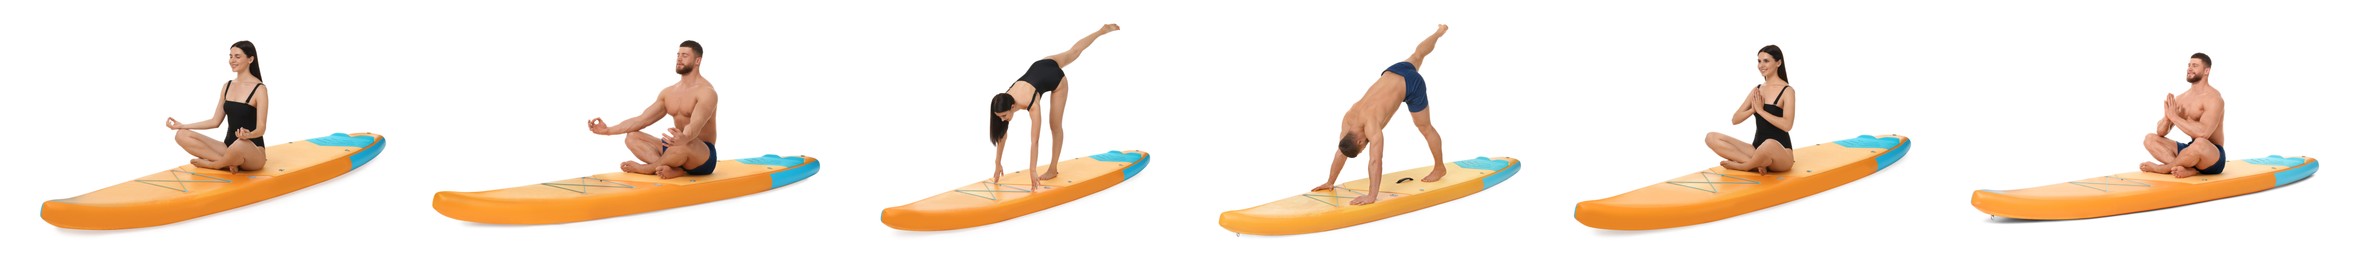 Image of Collage with photos of young man and woman practicing yoga on sup board isolated on white